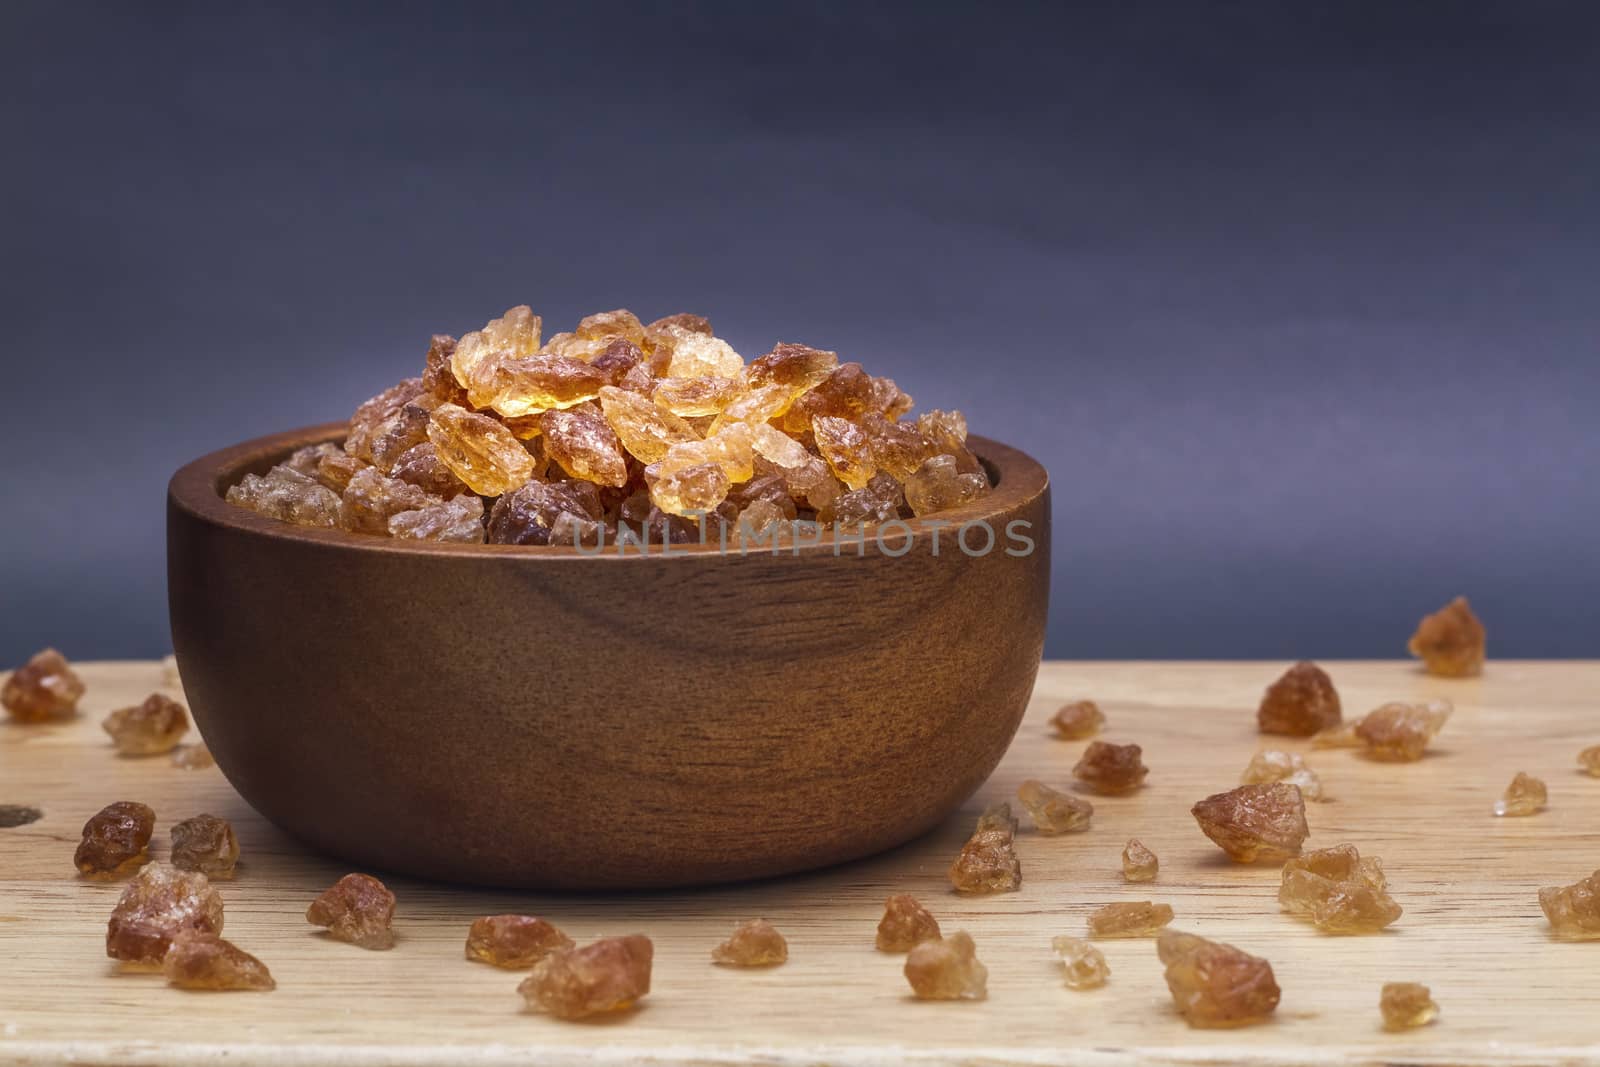 Brown rock sugar in the wooden bowl